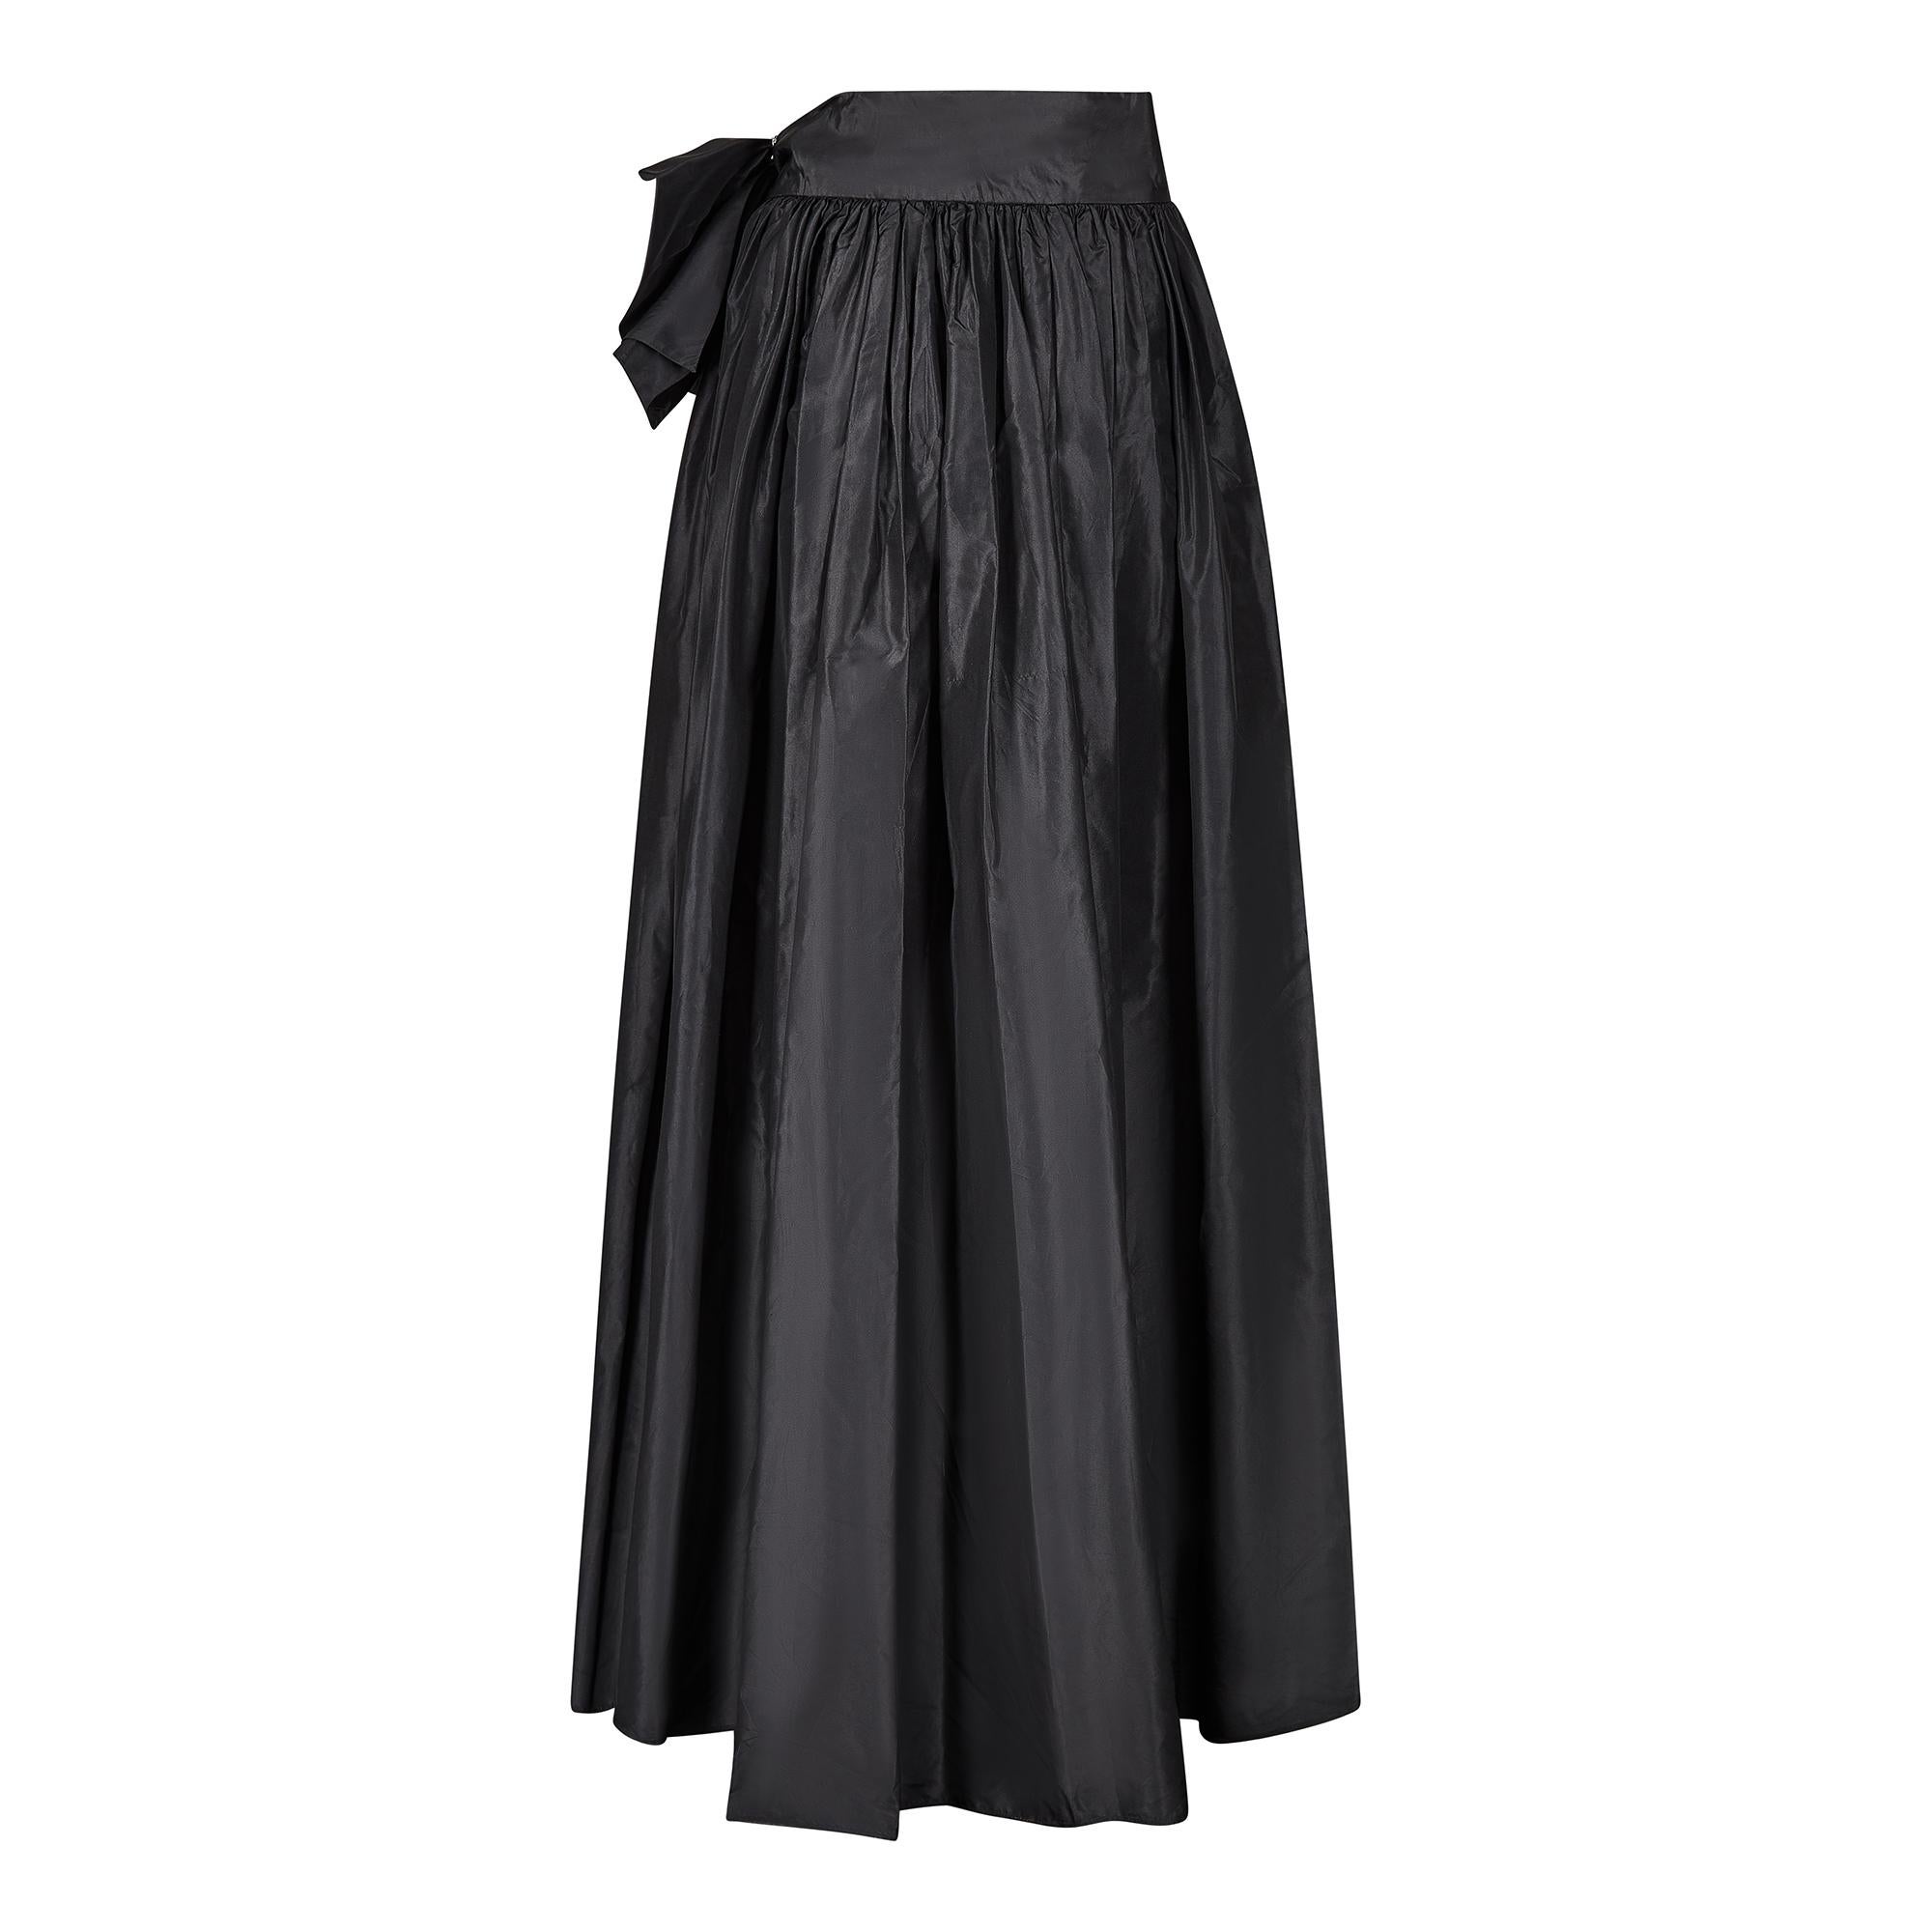 This 1980s black silk taffeta Gina Fratini skirt is a dramatic interpretation with very striking design elements including an asymmetric hem that is shorter at the front with a gentle curving train at the back. It has a gathered waistline that is